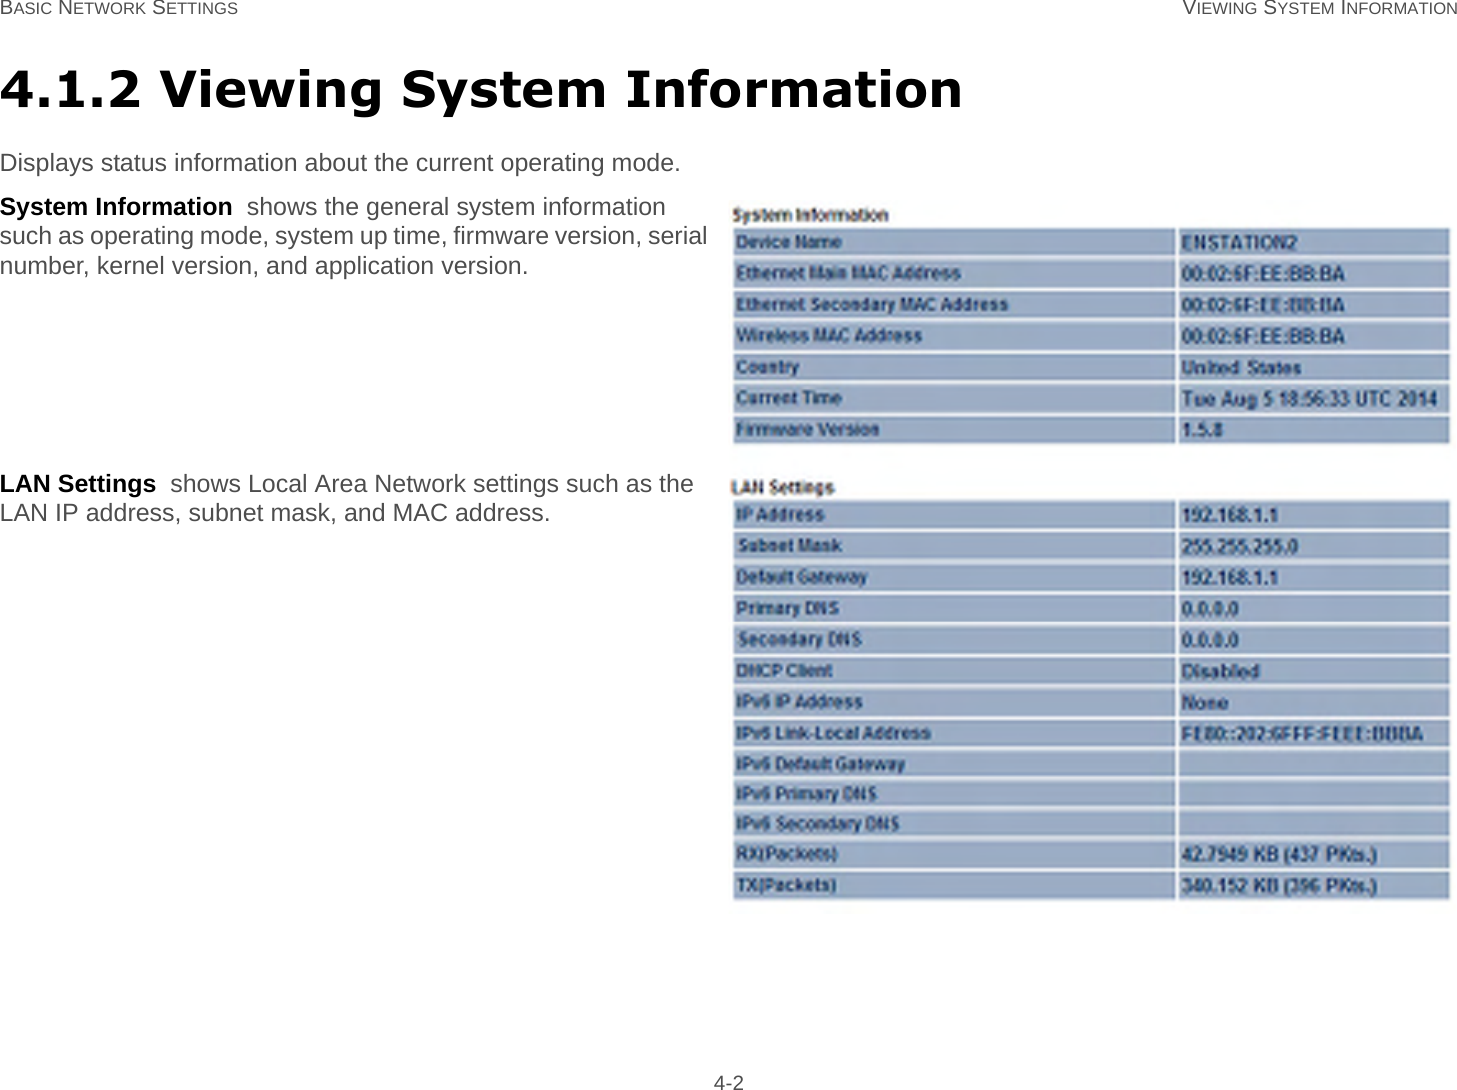 BASIC NETWORK SETTINGS VIEWING SYSTEM INFORMATION 4-24.1.2 Viewing System InformationDisplays status information about the current operating mode.System Information  shows the general system information such as operating mode, system up time, firmware version, serial number, kernel version, and application version.LAN Settings  shows Local Area Network settings such as the LAN IP address, subnet mask, and MAC address.